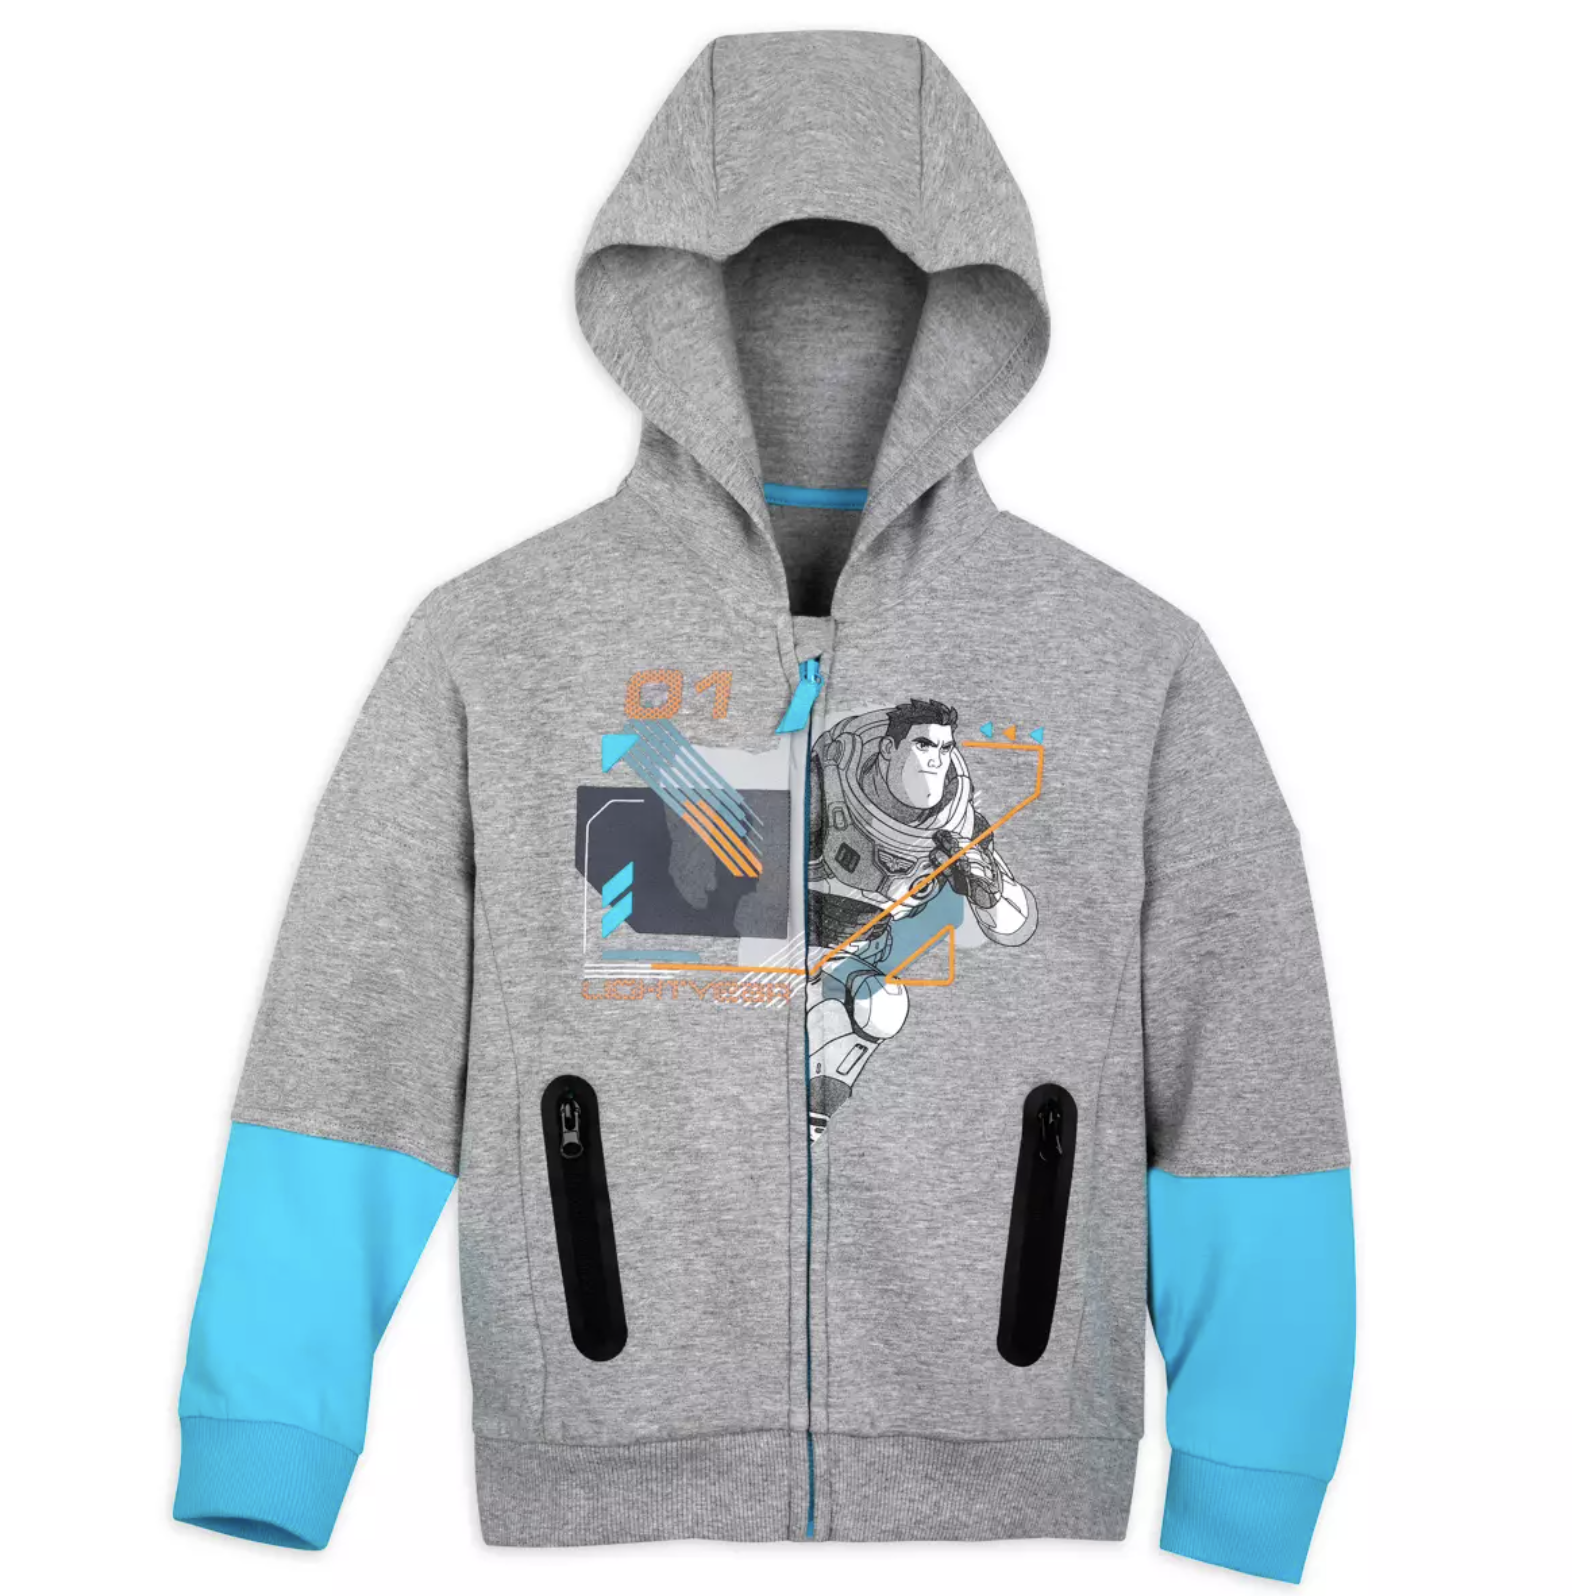 A gray and blue Buzz Lightyear hoodie with pockets